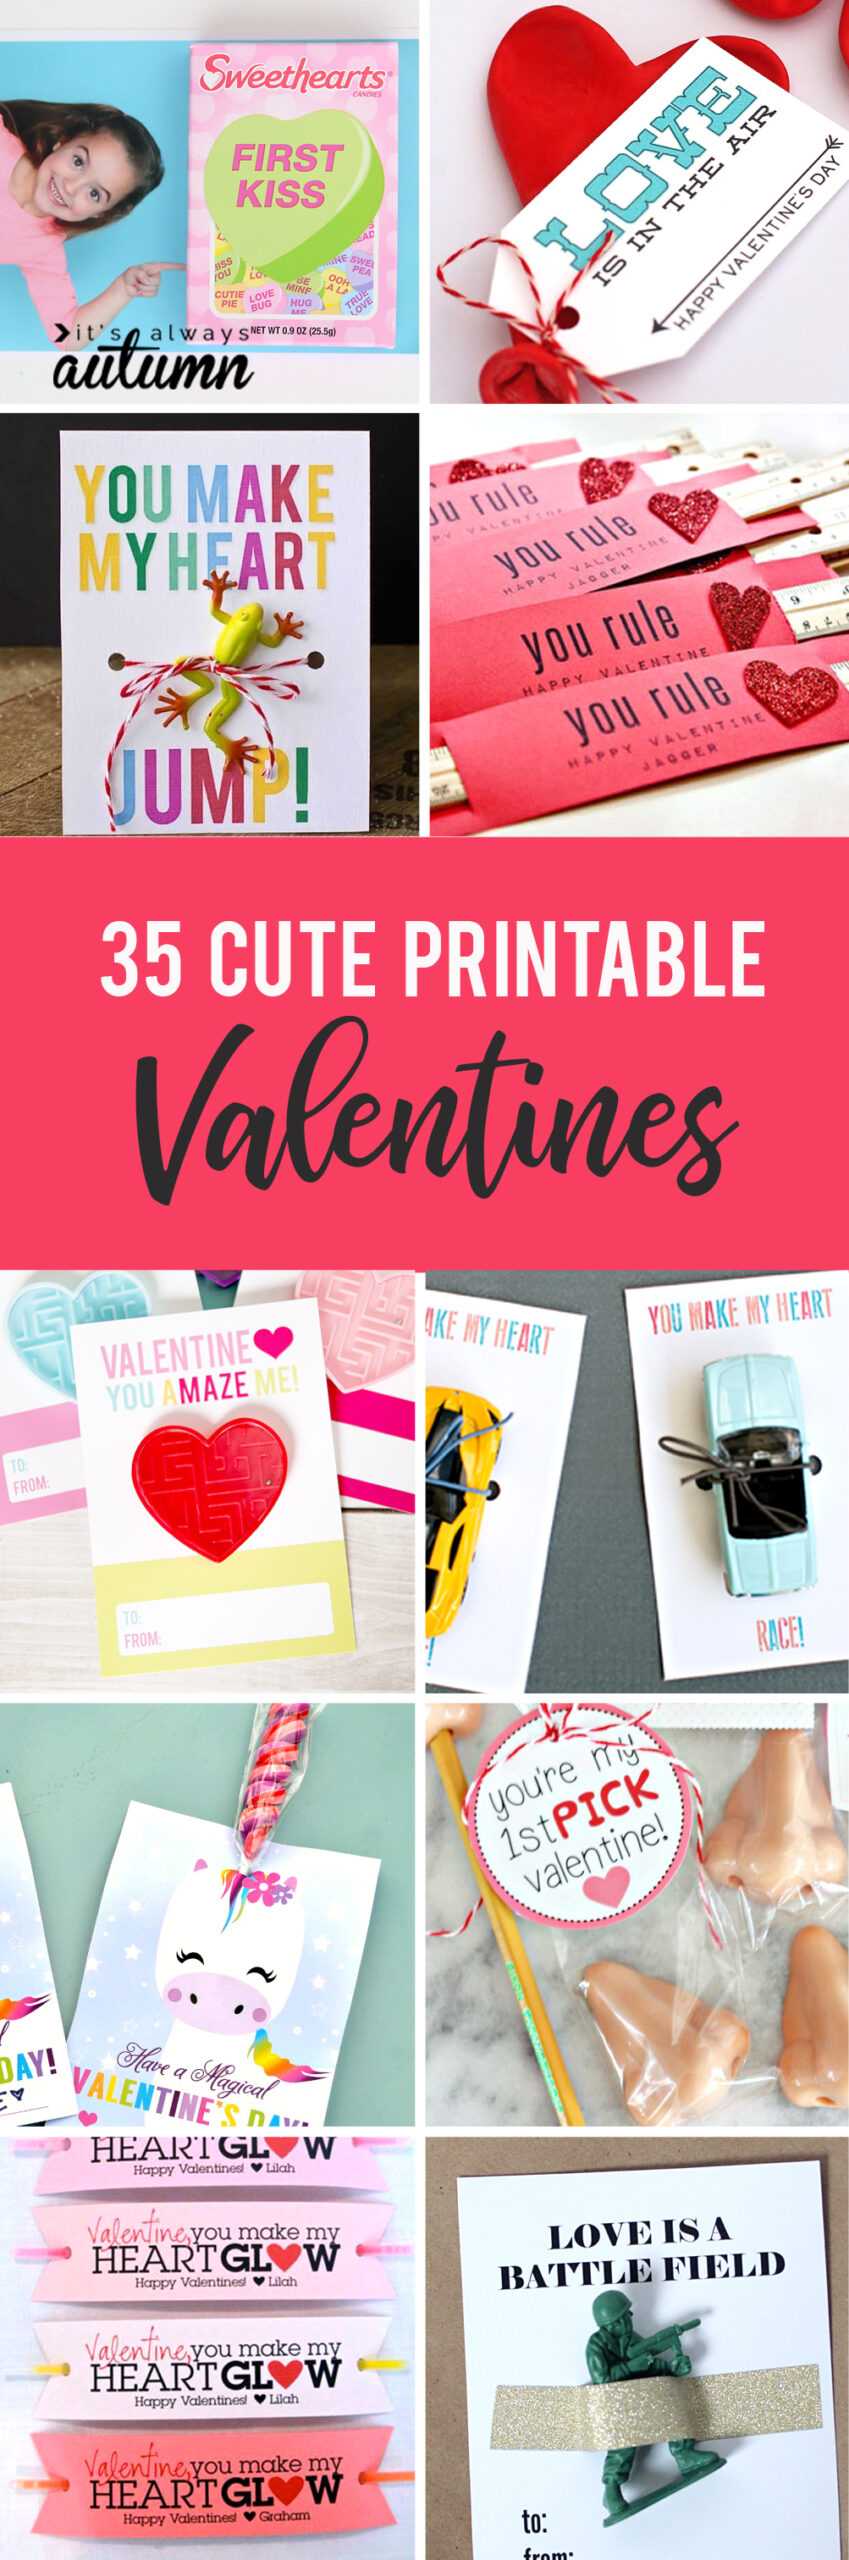 35 Adorable Diy Valentine's Cards To Print At Home For Your Regarding Valentine Card Template For Kids